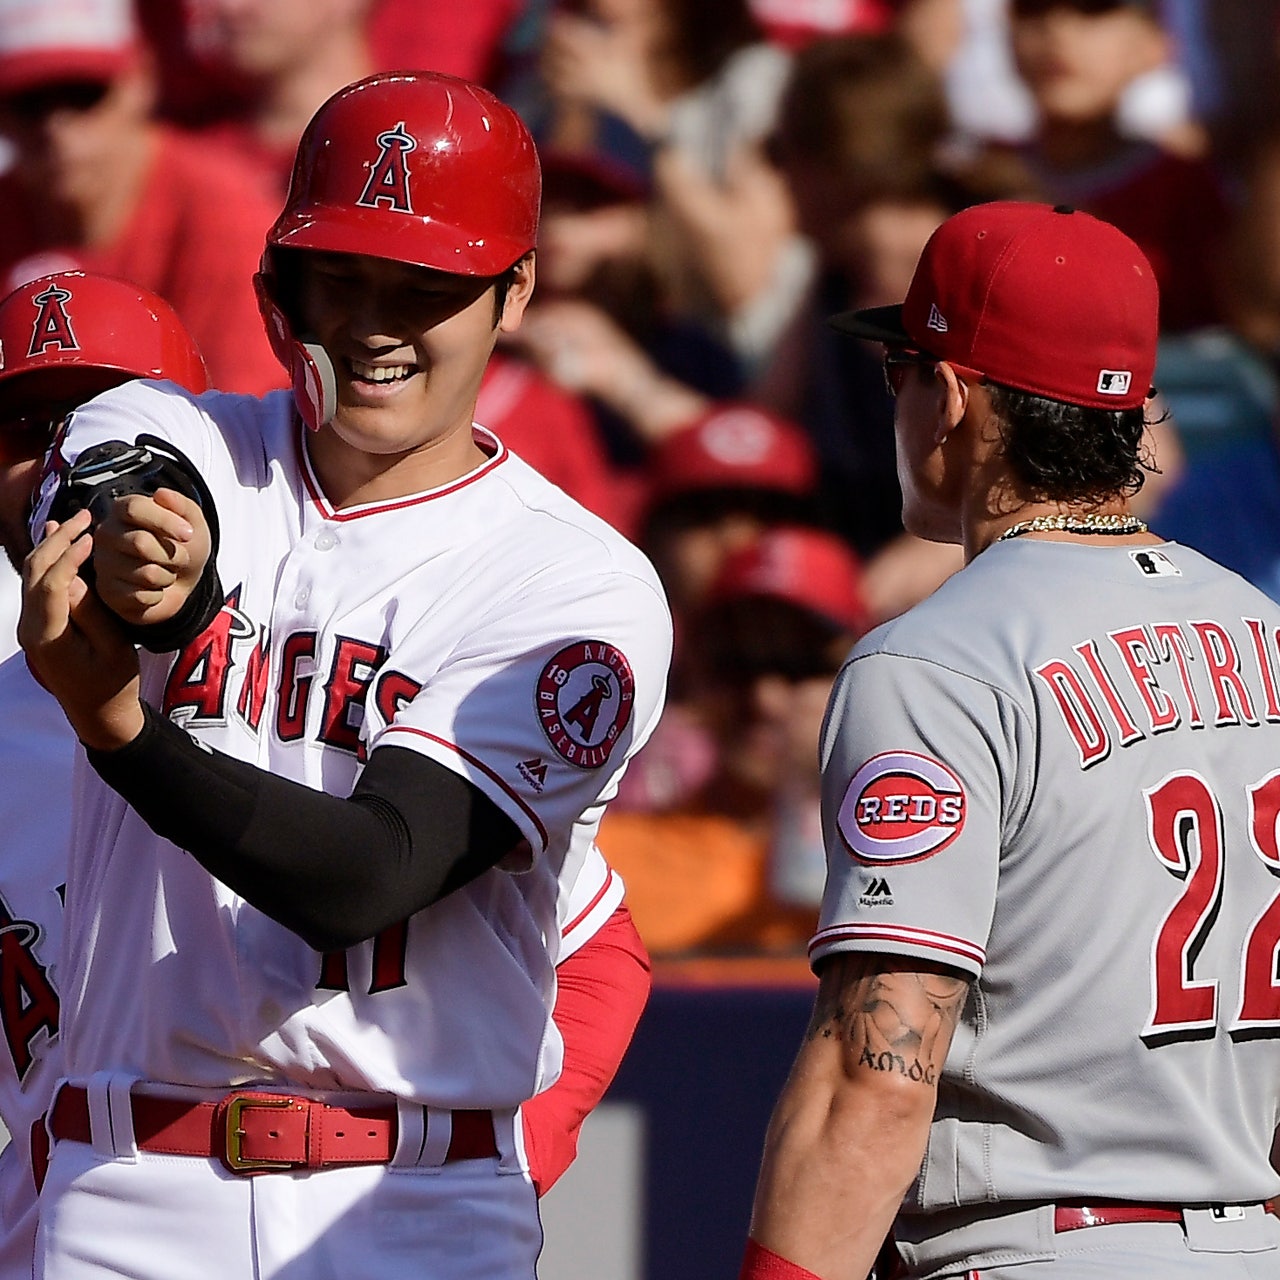 Ohtani leaves first game early and won't pitch again this season as Reds  sweep 2 from Halos